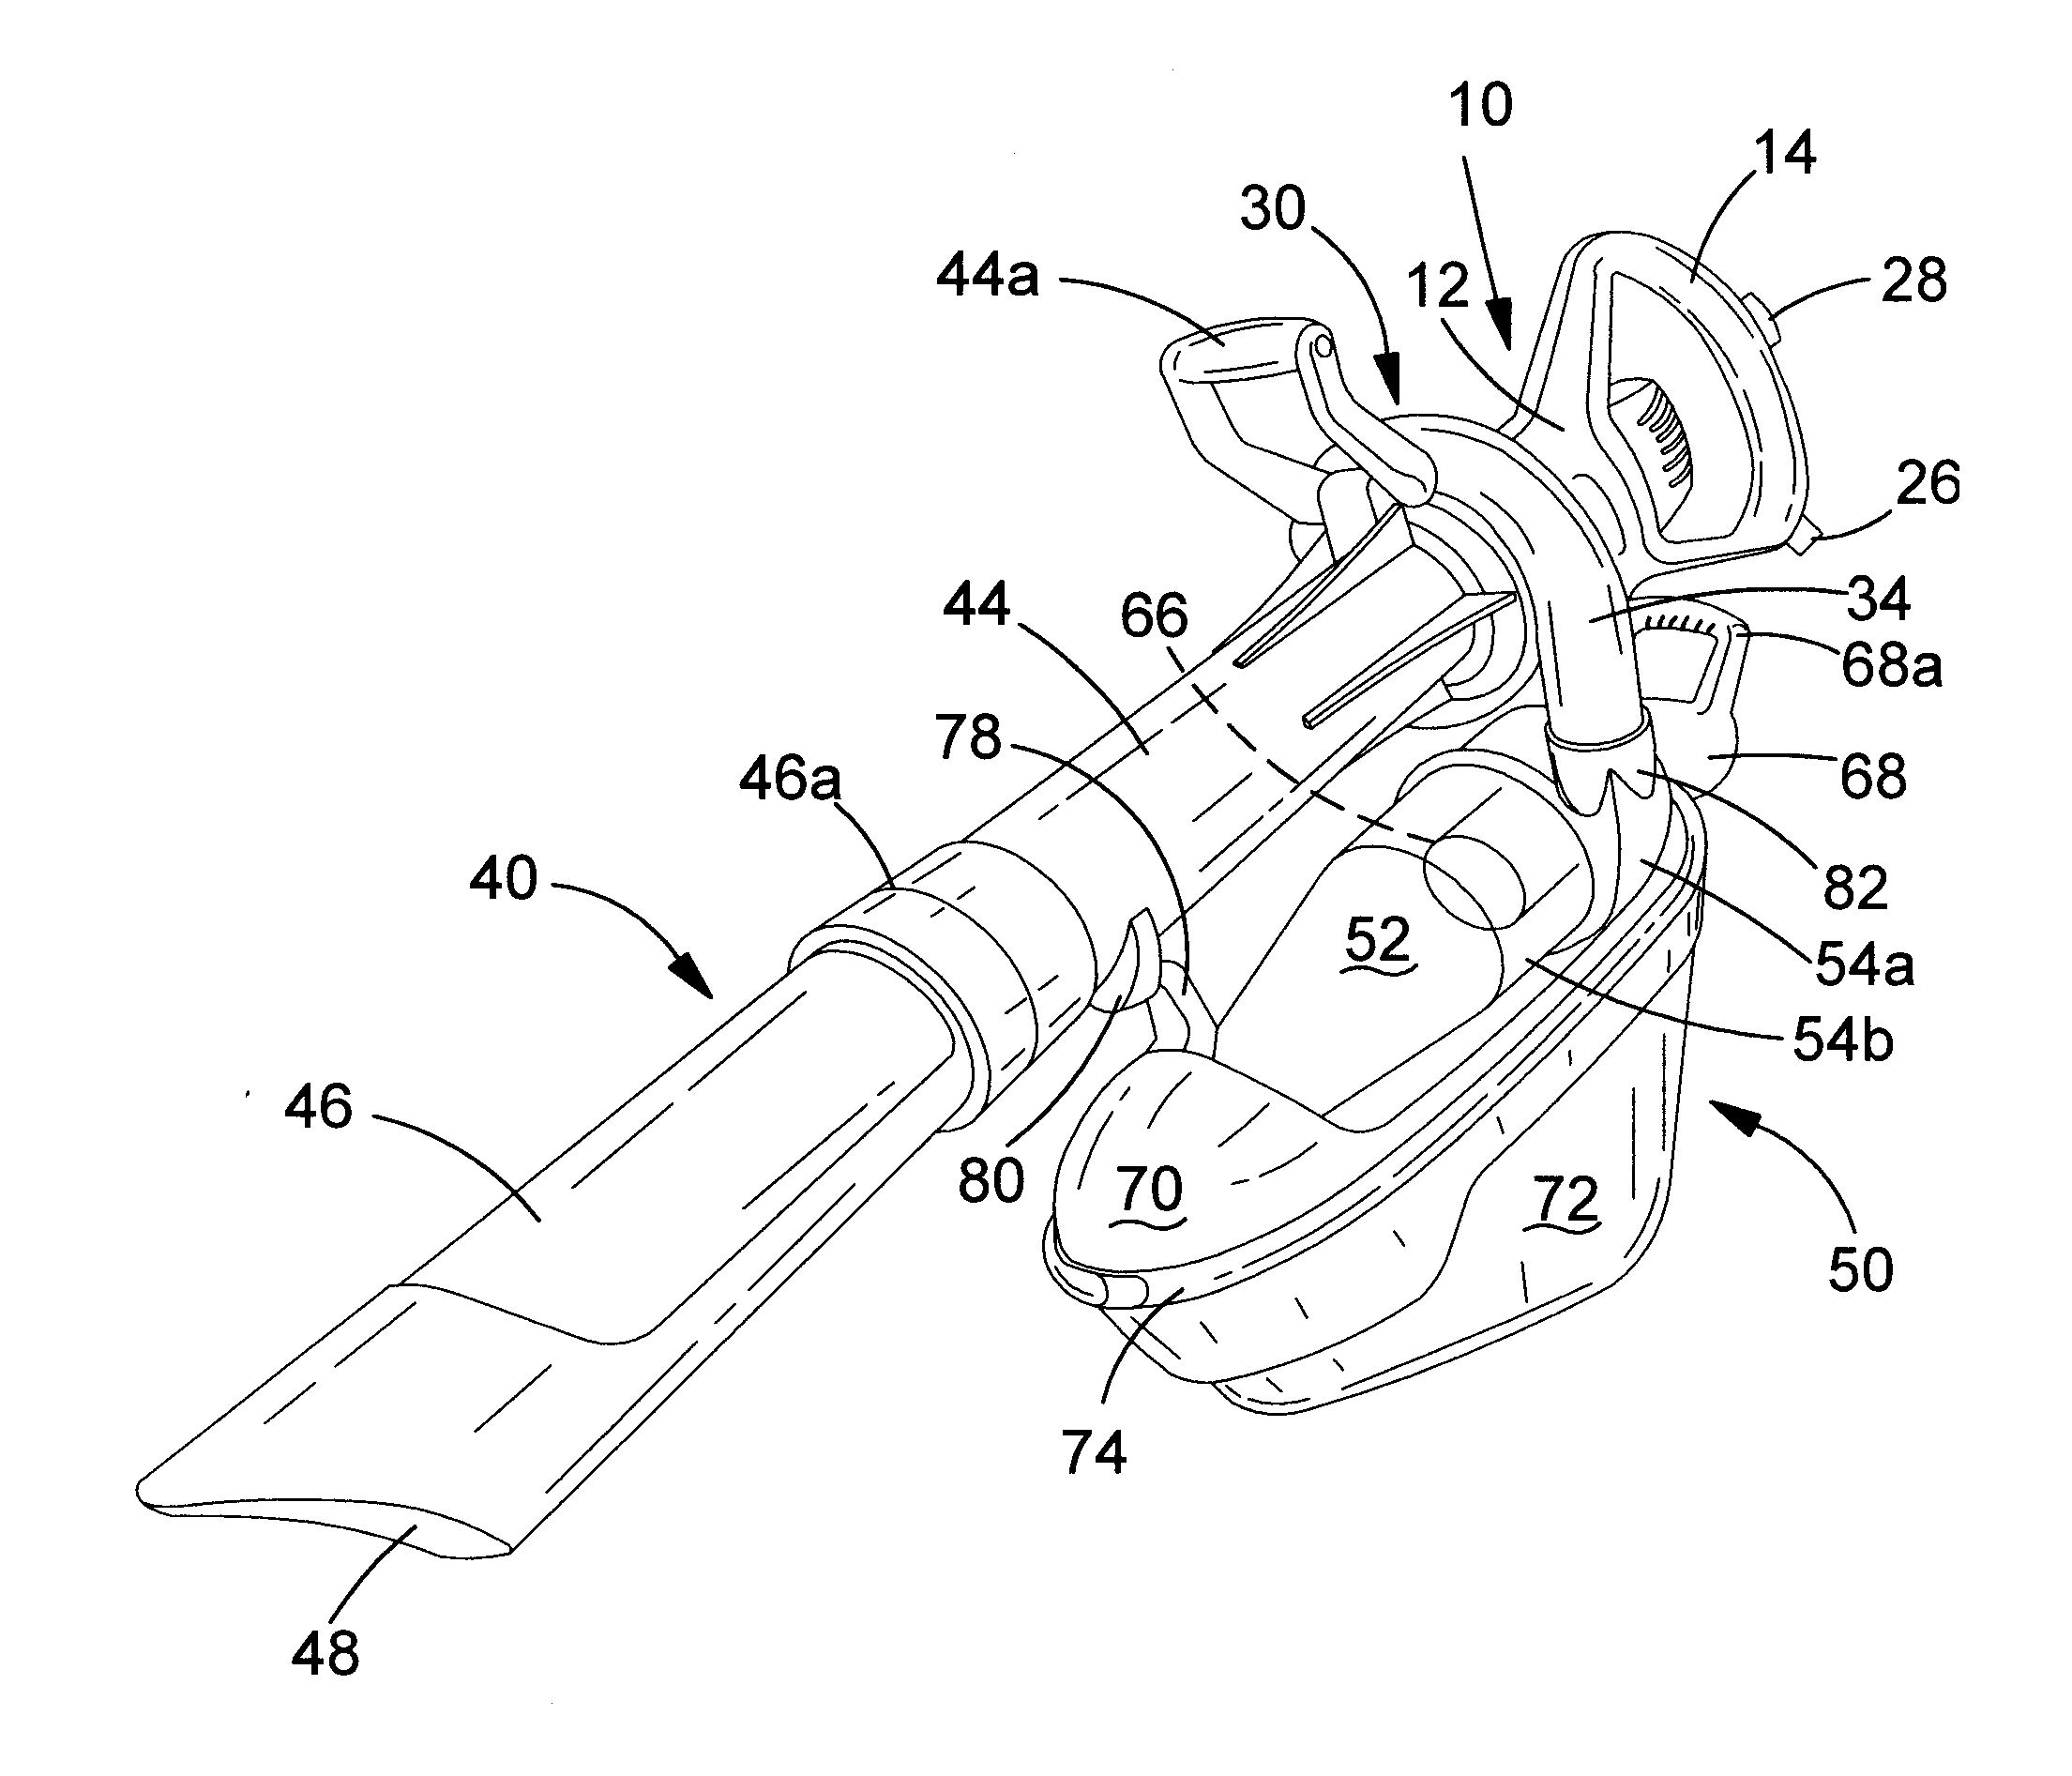 Apparatus for collection of garden waste